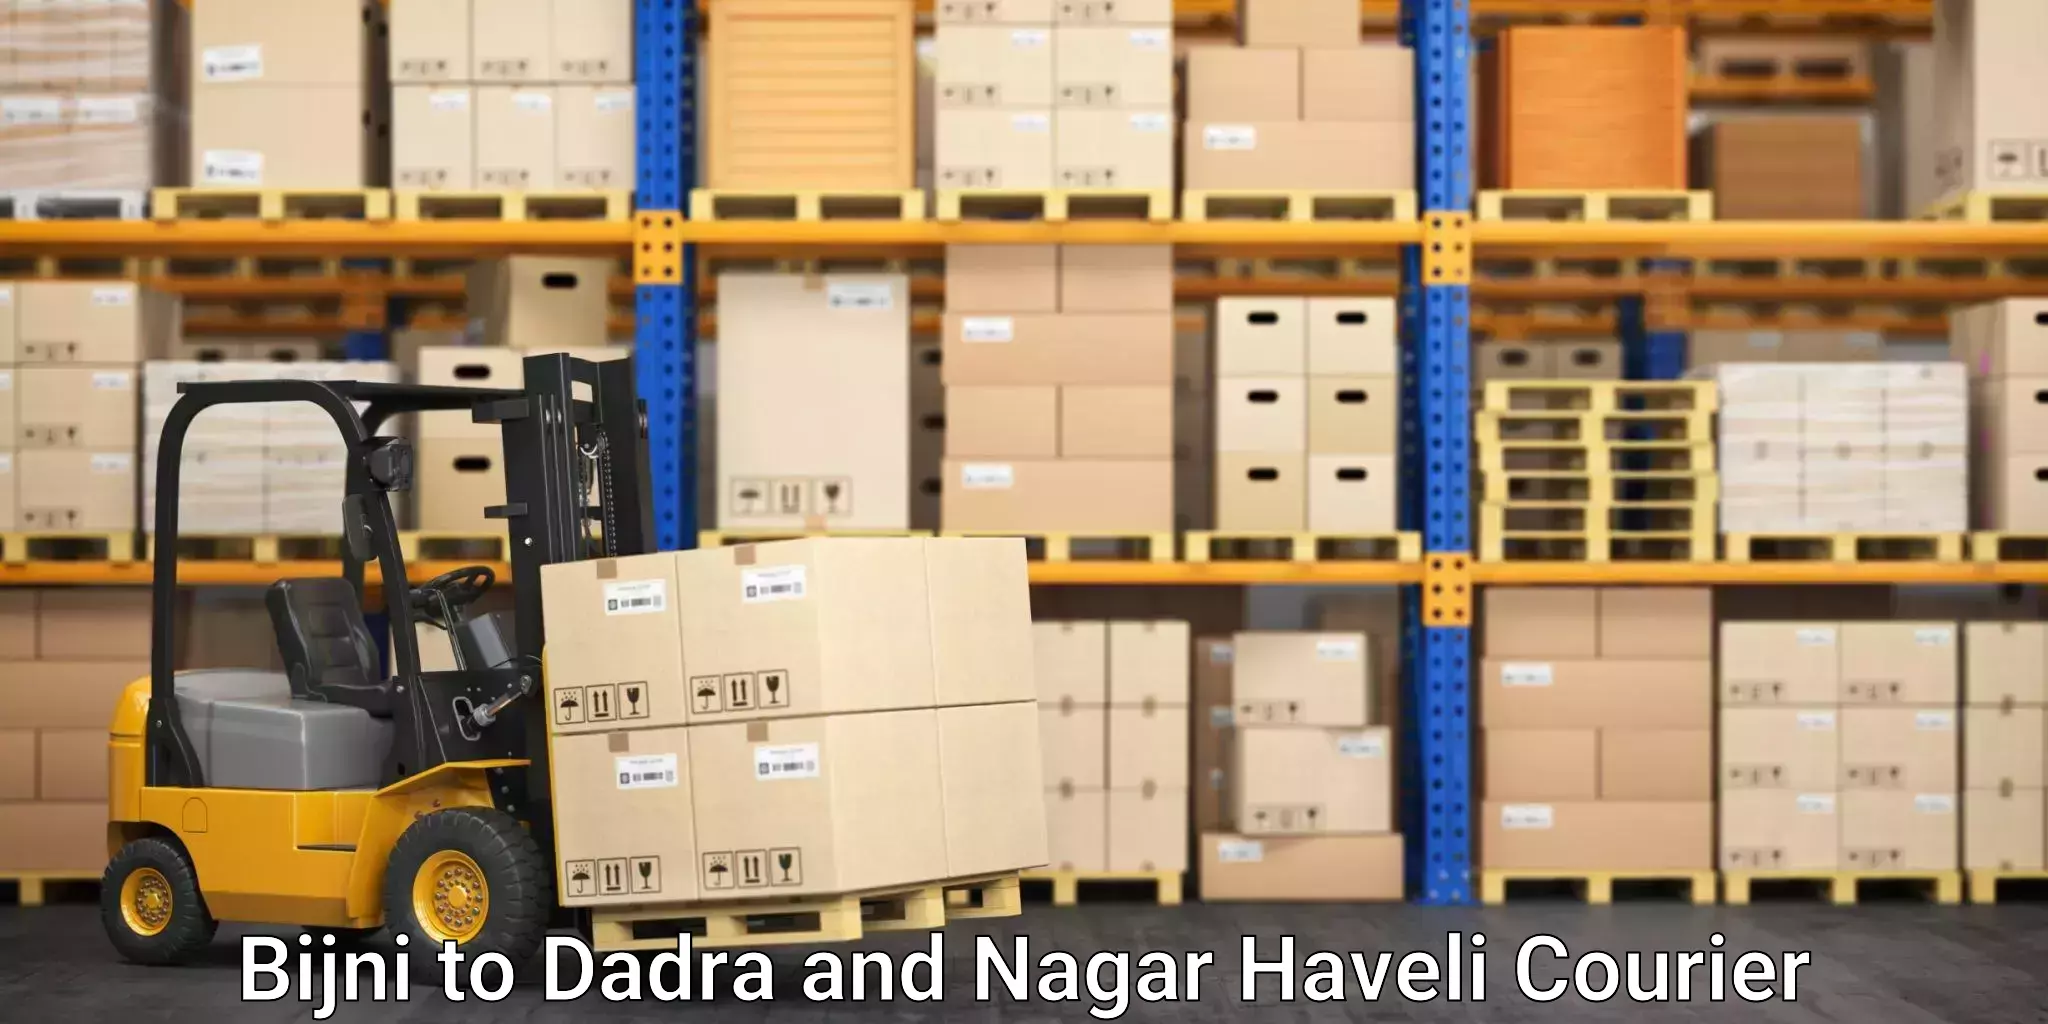 Expedited parcel delivery Bijni to Dadra and Nagar Haveli